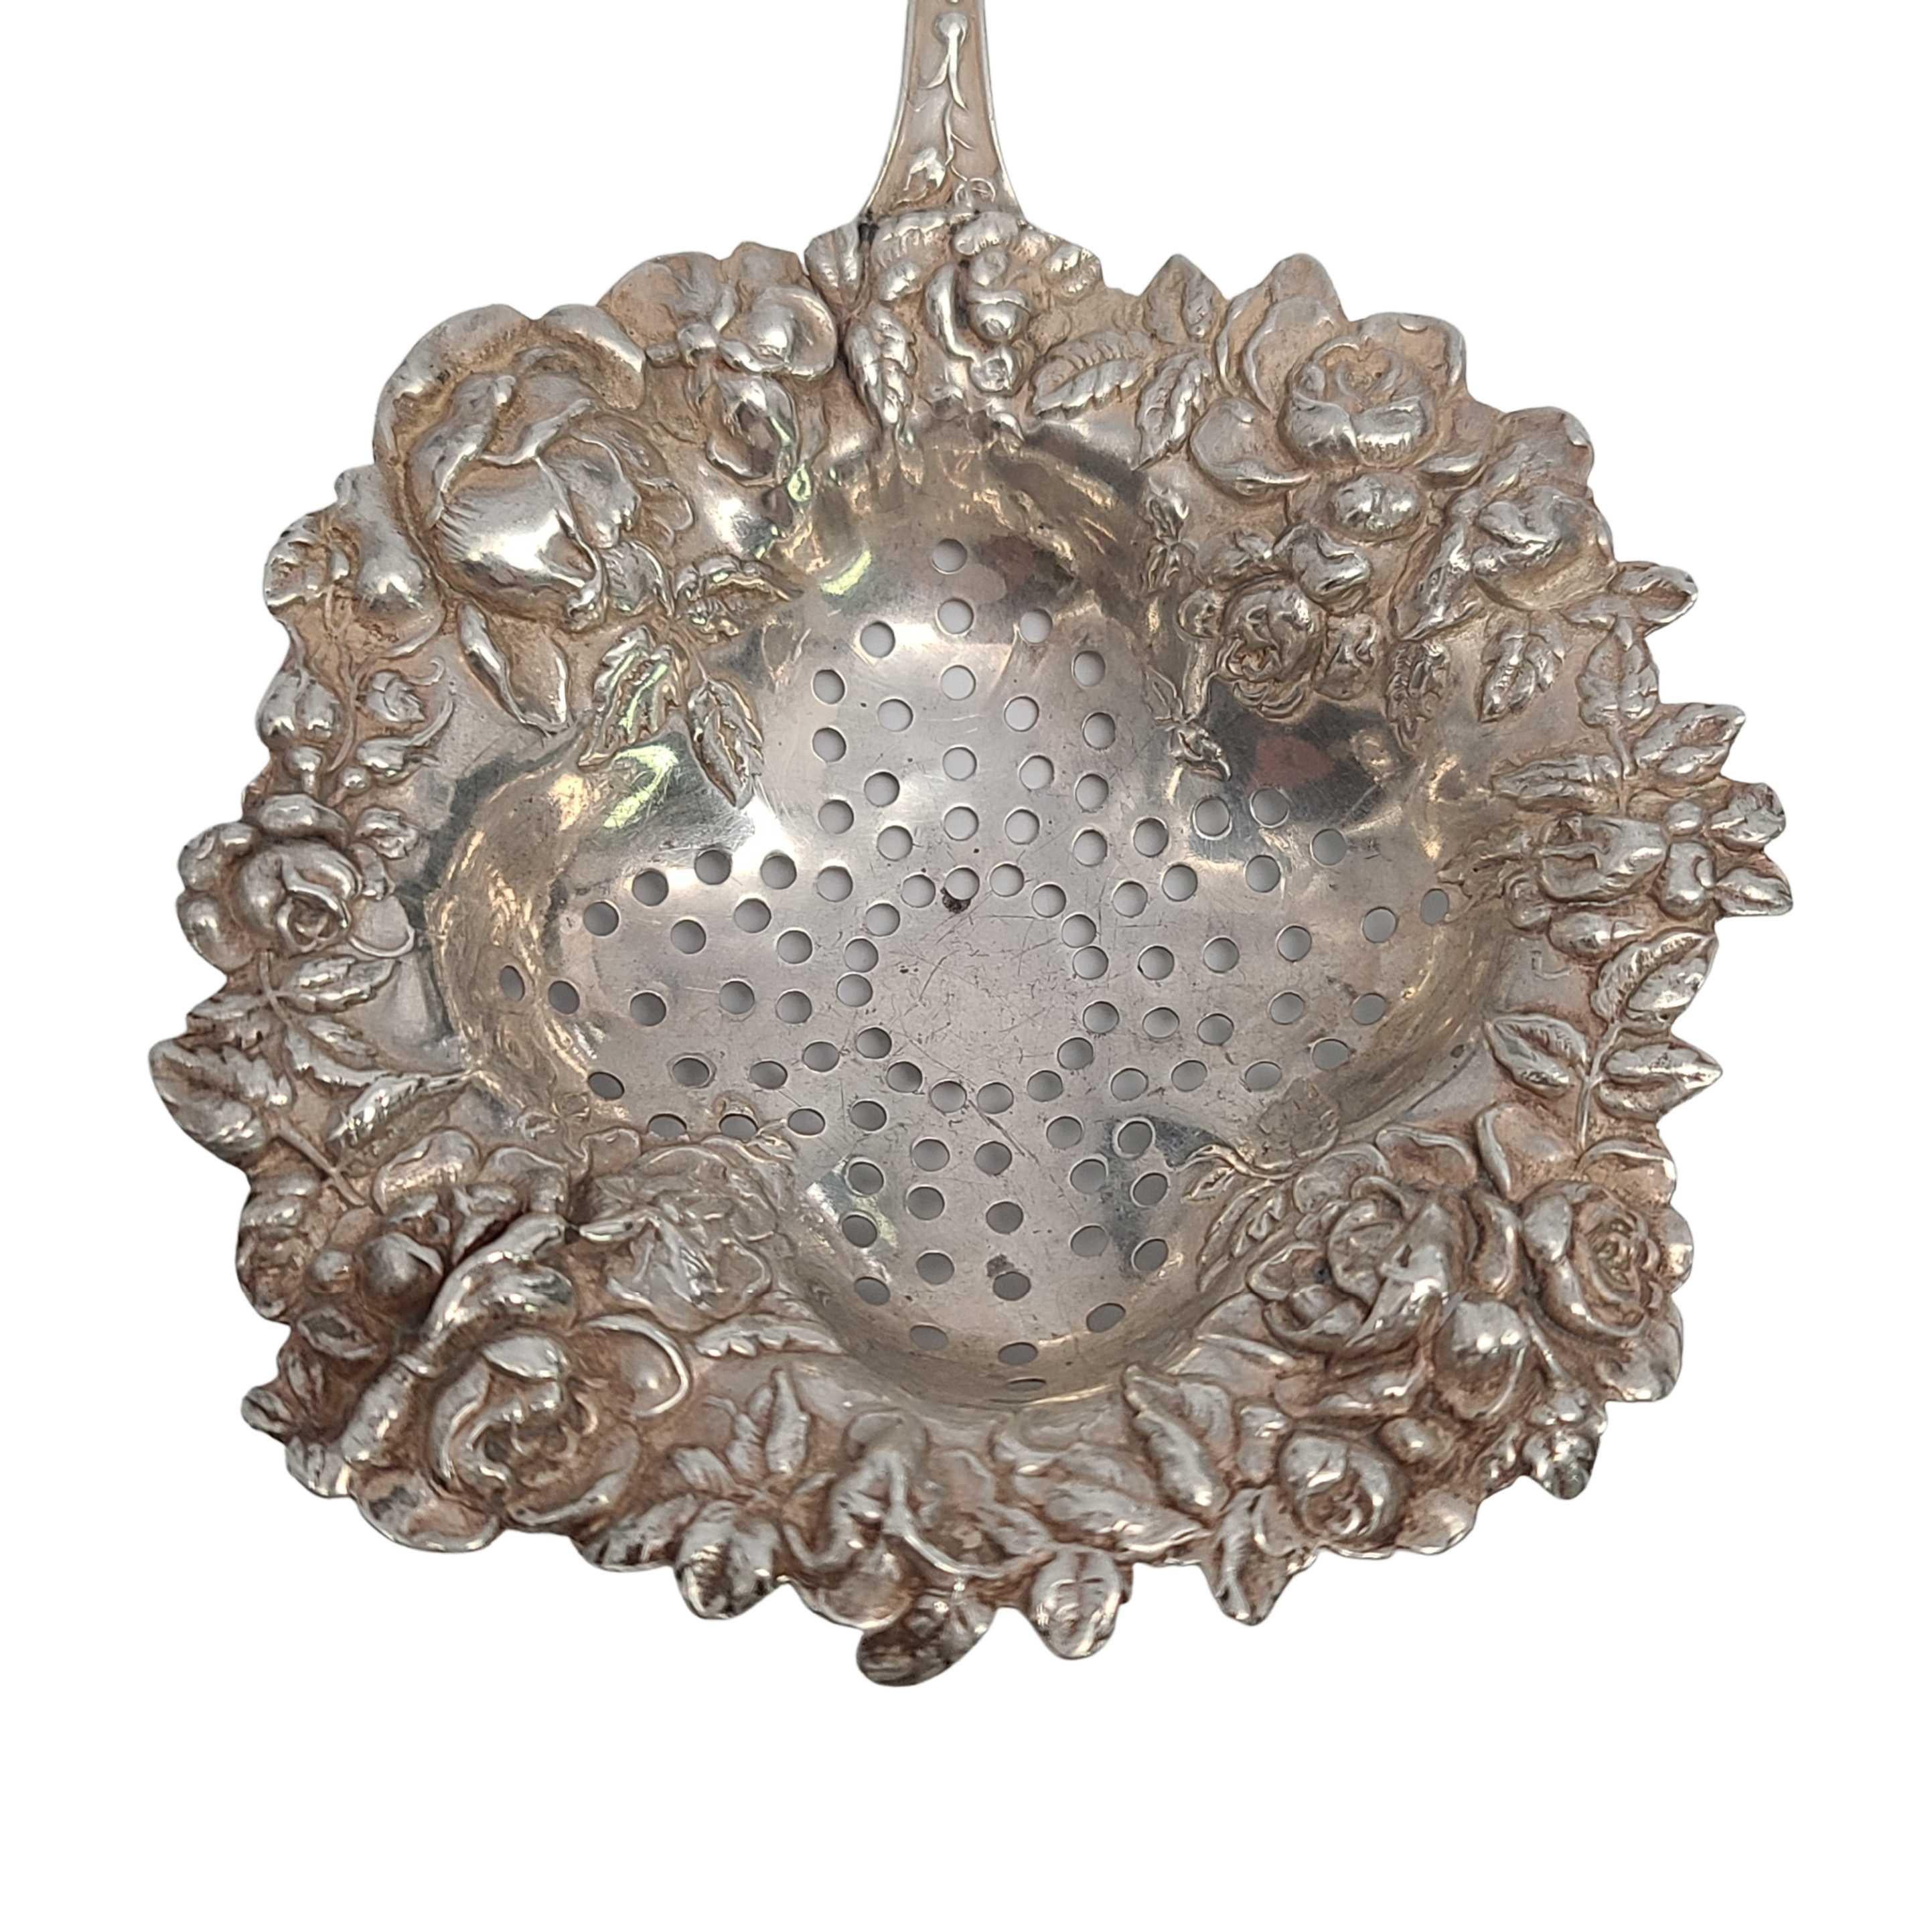 Late 19th Century George W. Shiebler Sterling Silver American Beauty 61 Over the Cup Tea Strainer